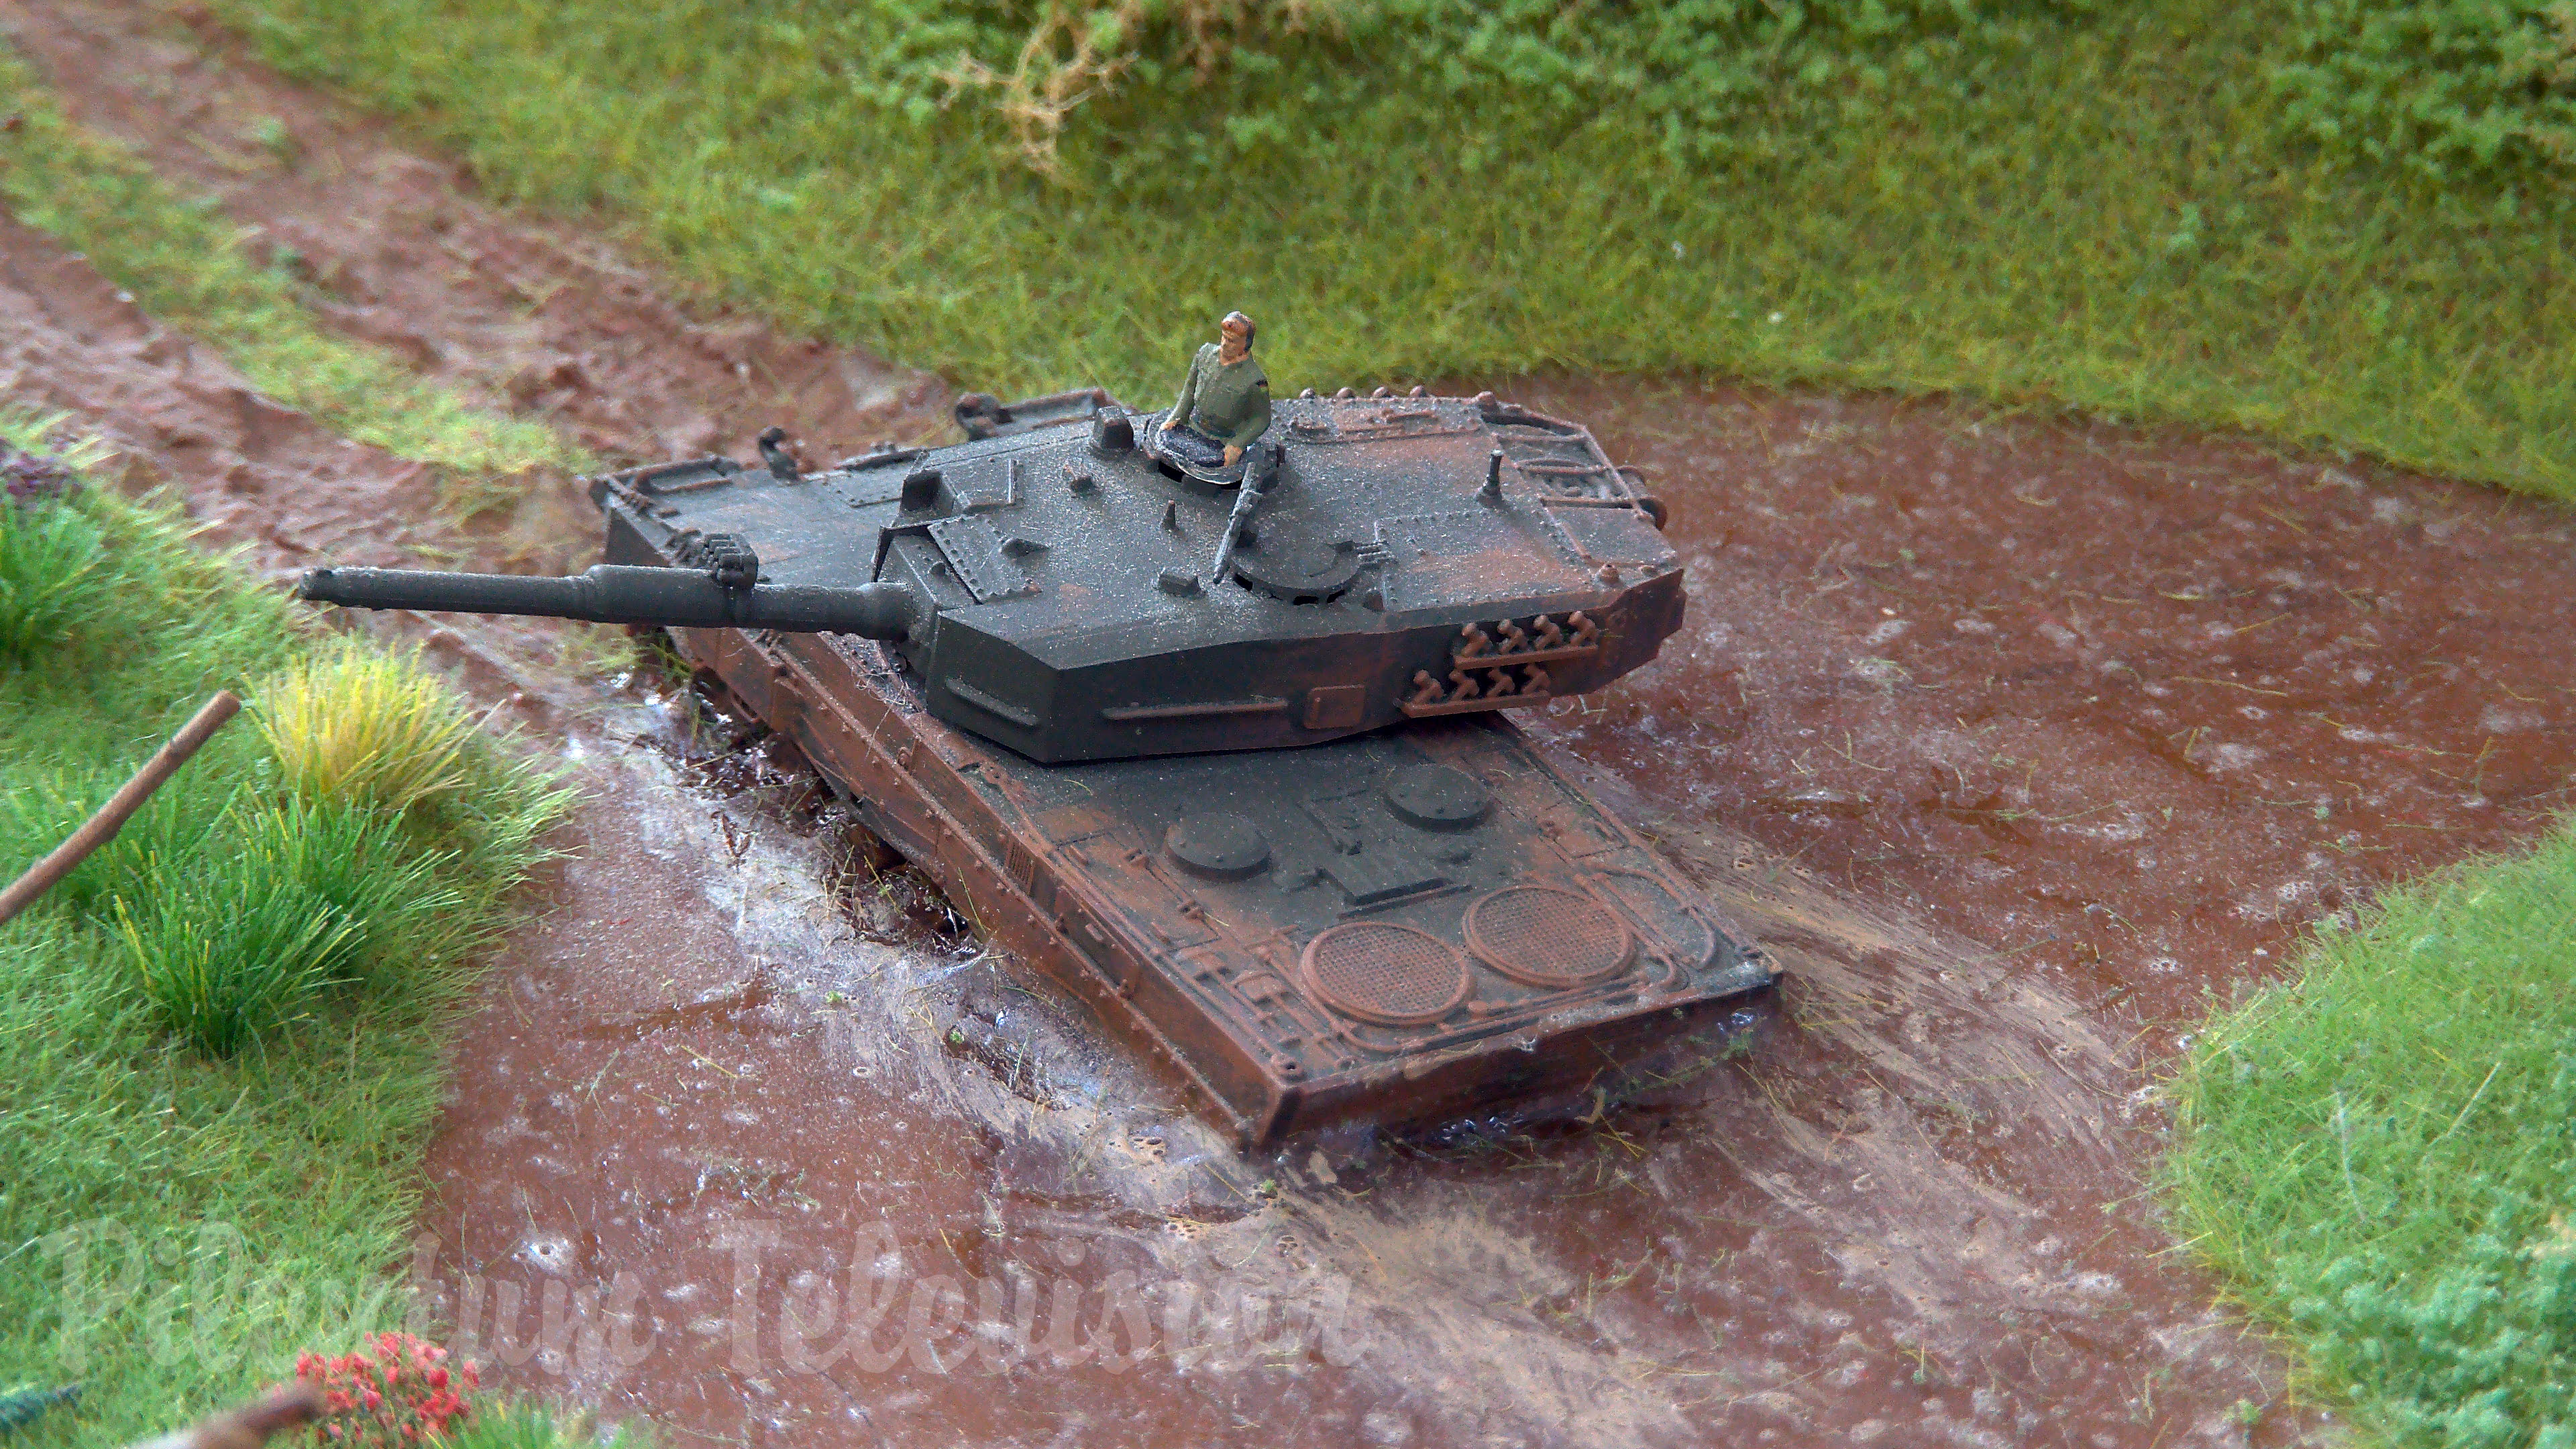 Military Model Train Diorama - German Model Tanks Transported by Steam Trains - HO Scale Model Layout